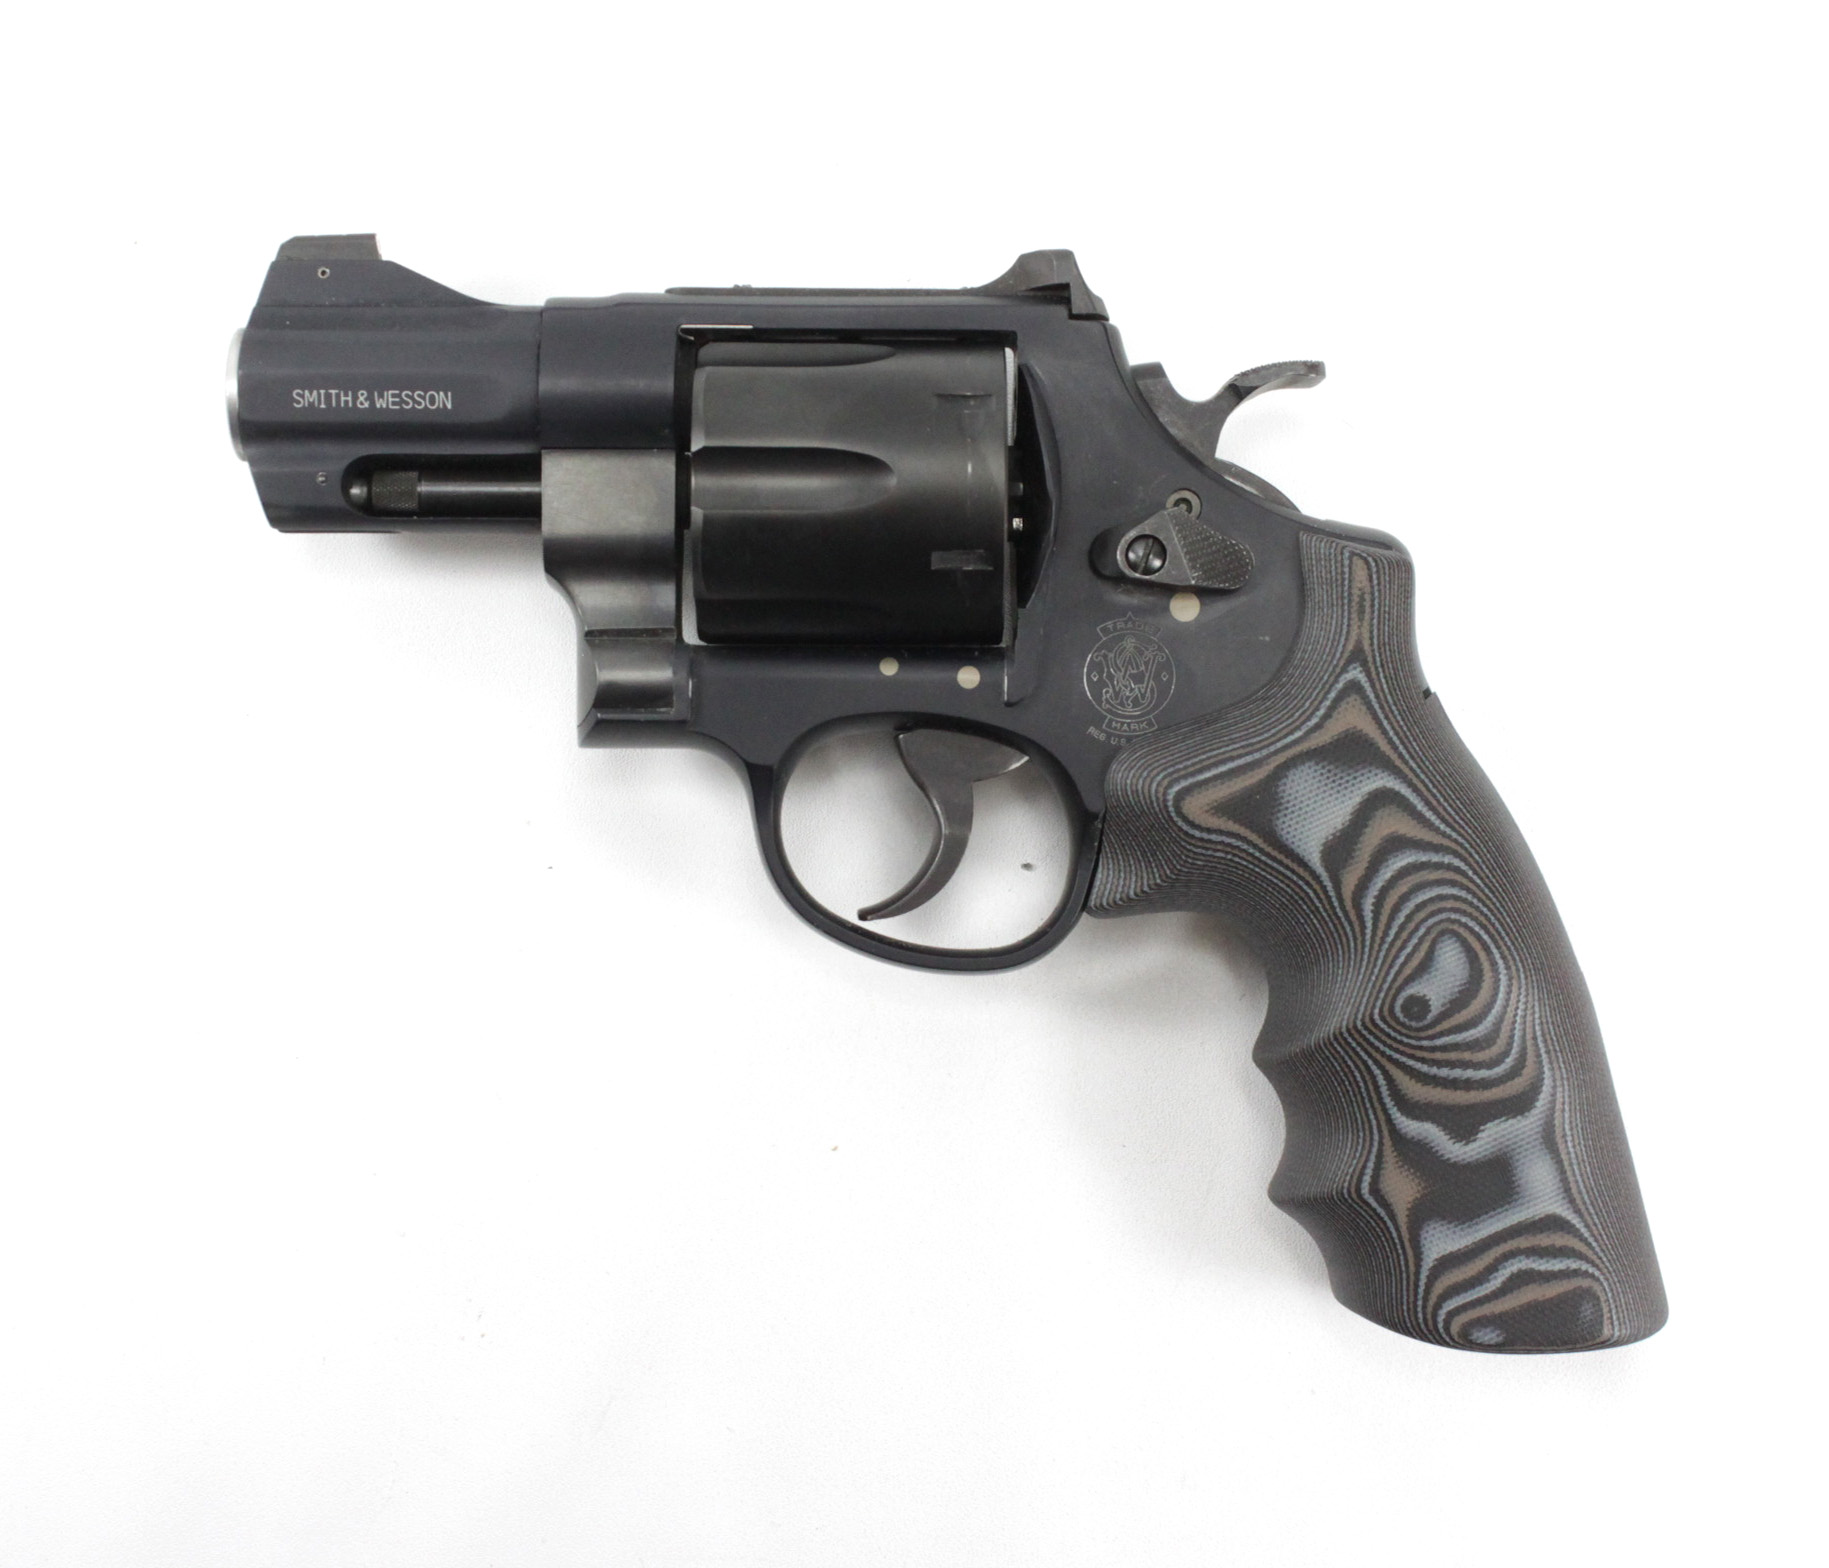 Smith and wesson grips revolver